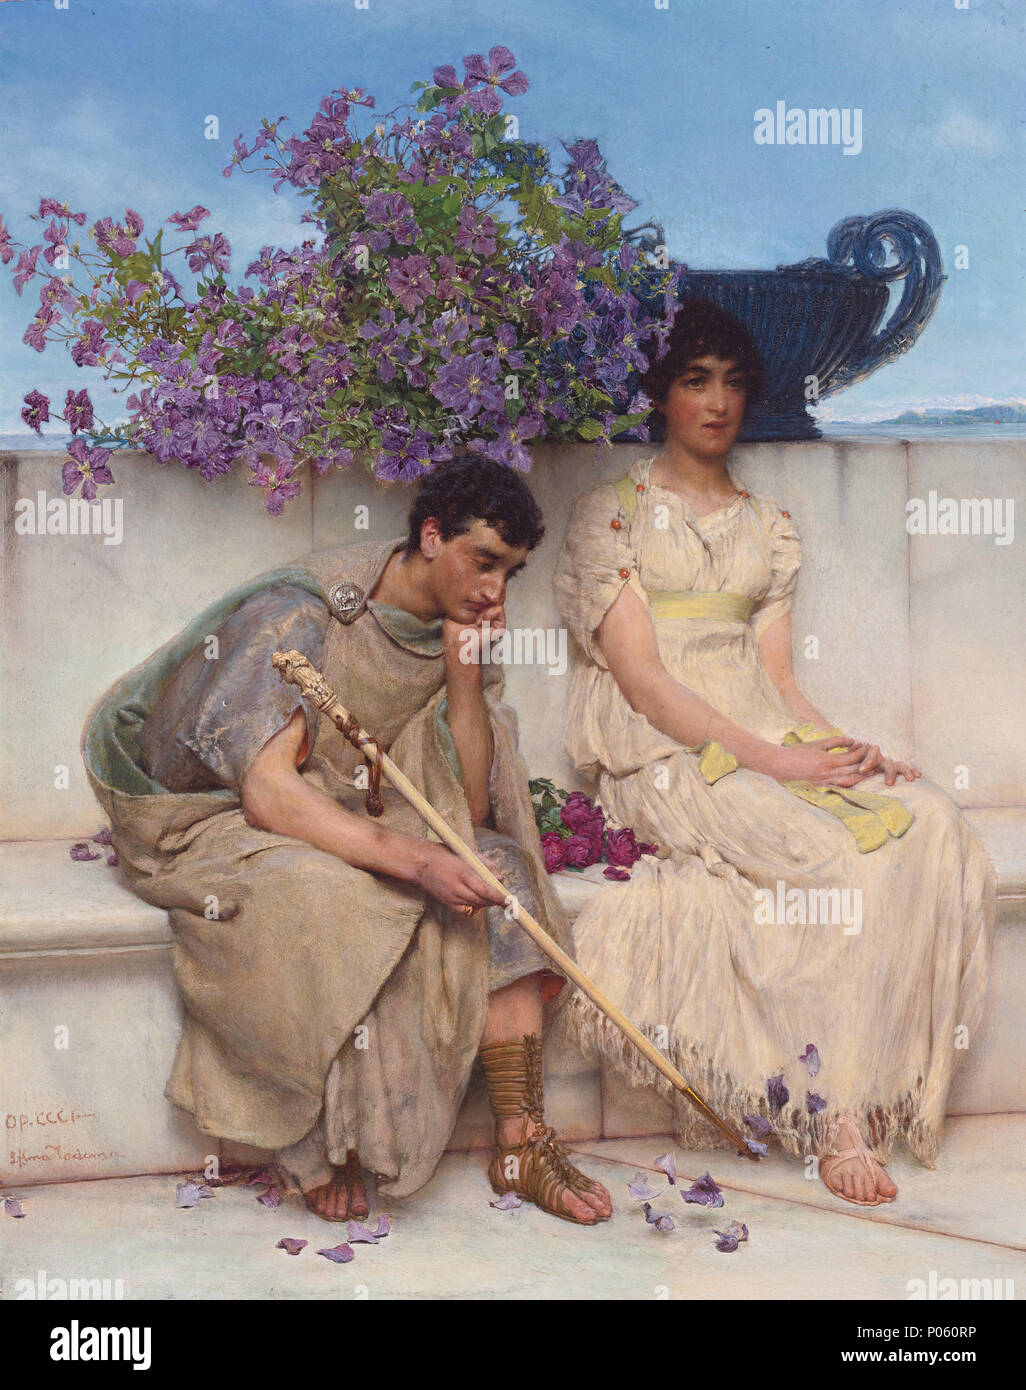 .  English: An eloquent silence  An eloquent silence  *oil on panel  *42 x 33 cm  *1890  *signed l.l.: OP. CCCI -  / L.  Alma Tadema 312 An eloquent silence, by Lawrence Alma-Tadema Stock Photo